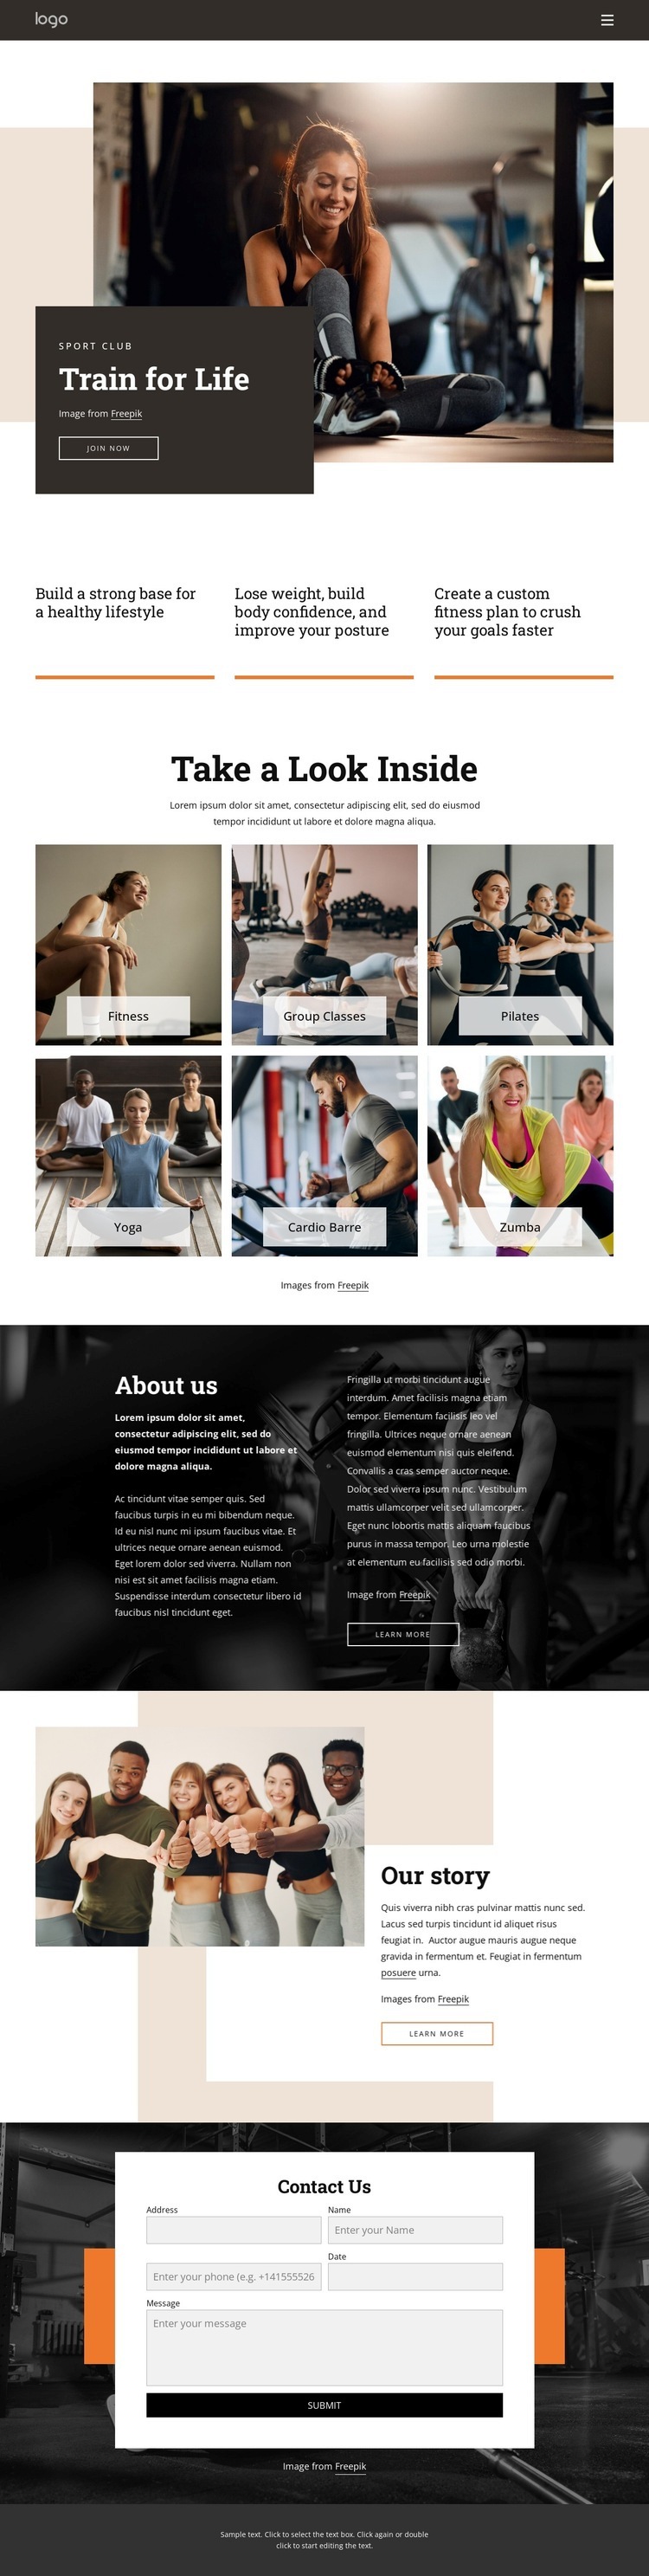 Get moving with our range of classes Wix Template Alternative